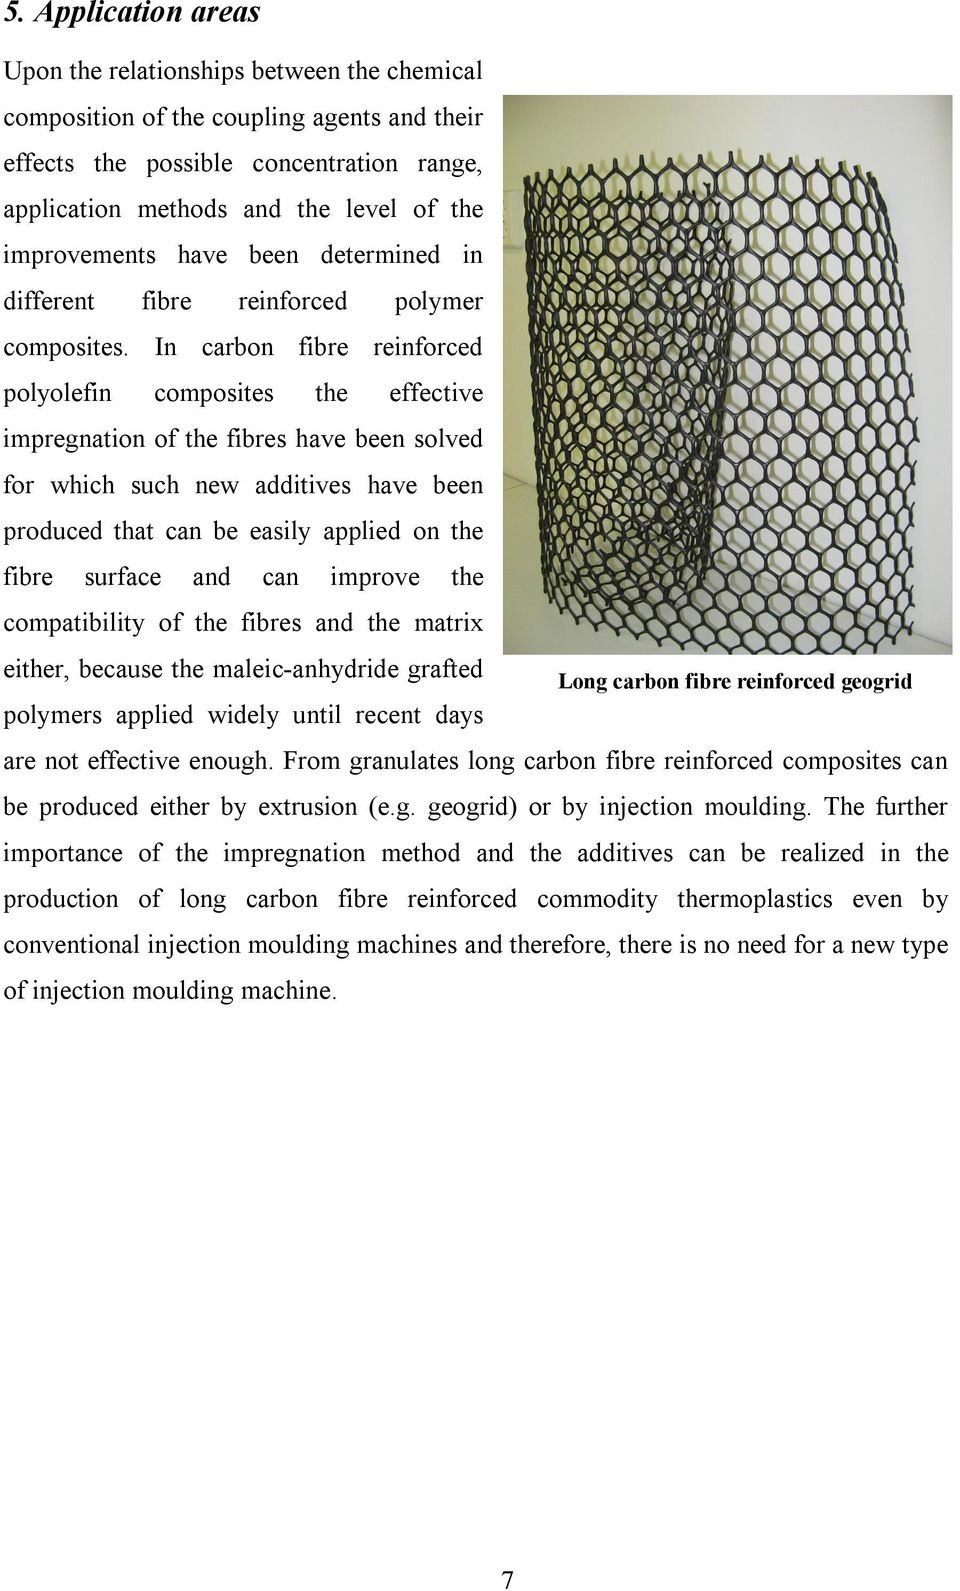 In carbon fibre reinforced polyolefin composites the effective impregnation of the fibres have been solved for which such new additives have been produced that can be easily applied on the fibre